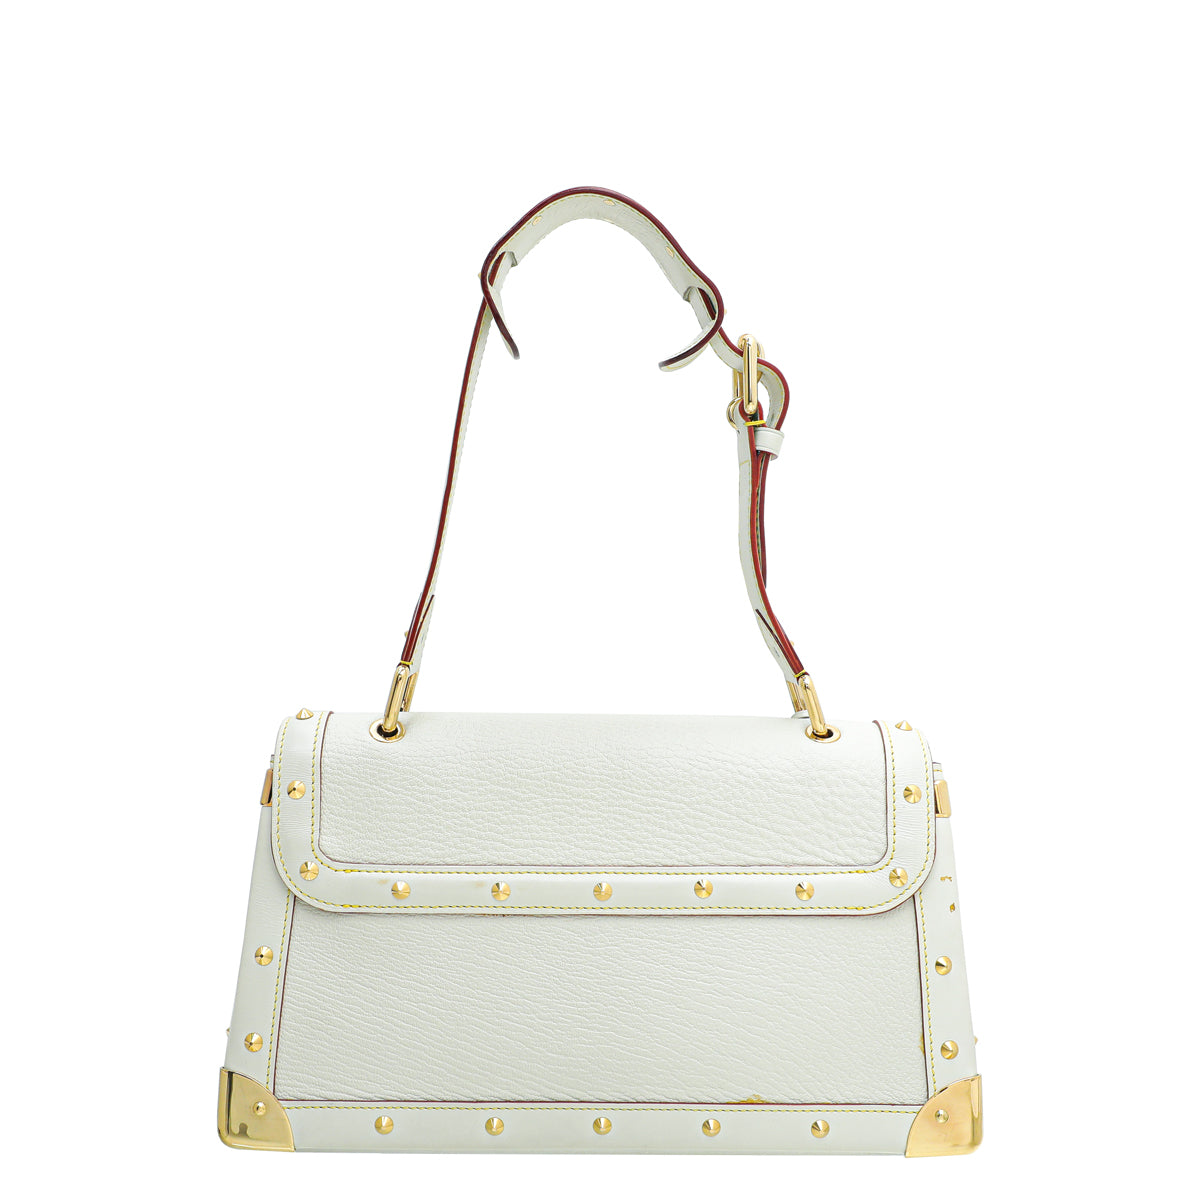 Louis Vuitton Le Talentueux Studded Bag in Suhali Leather in Cream